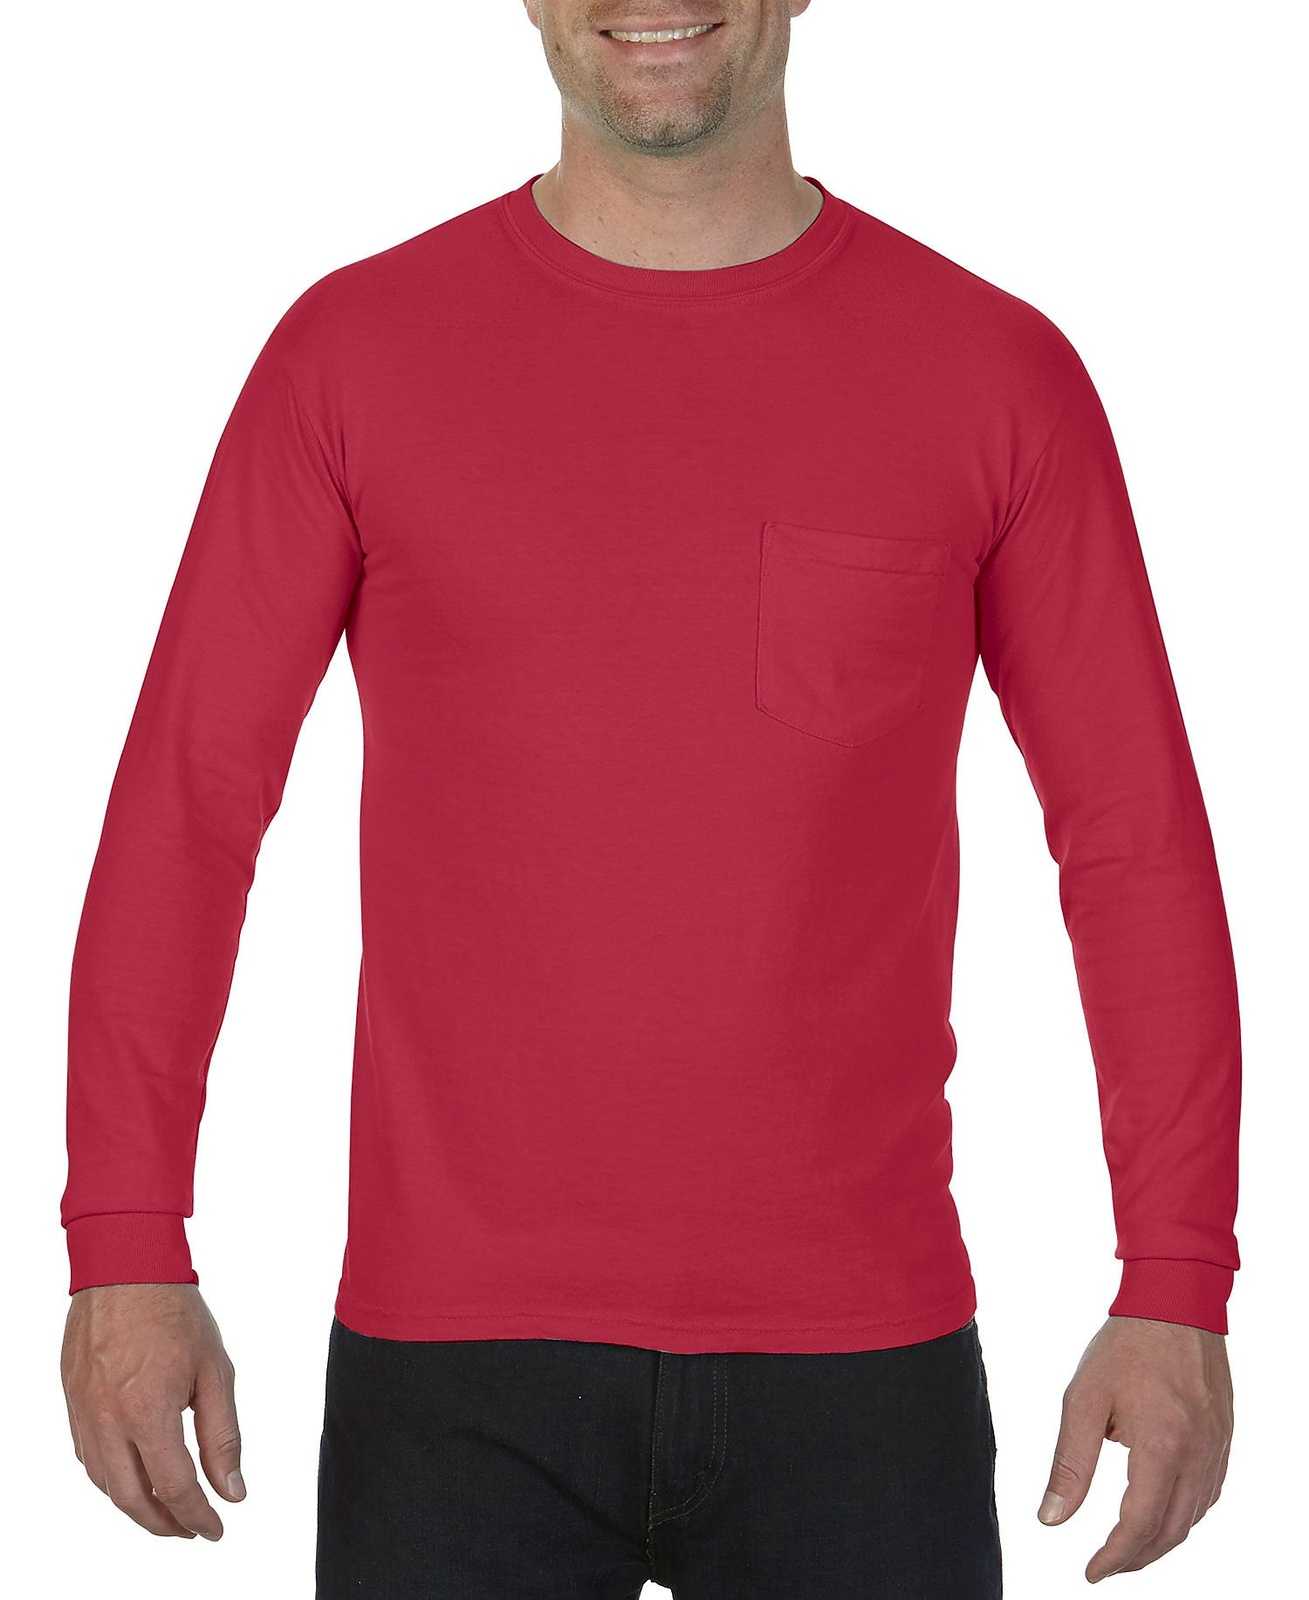 Comfort Colors 4410 Heavyweight Garment-Dyed Long Sleeve Pocket Tee - Red